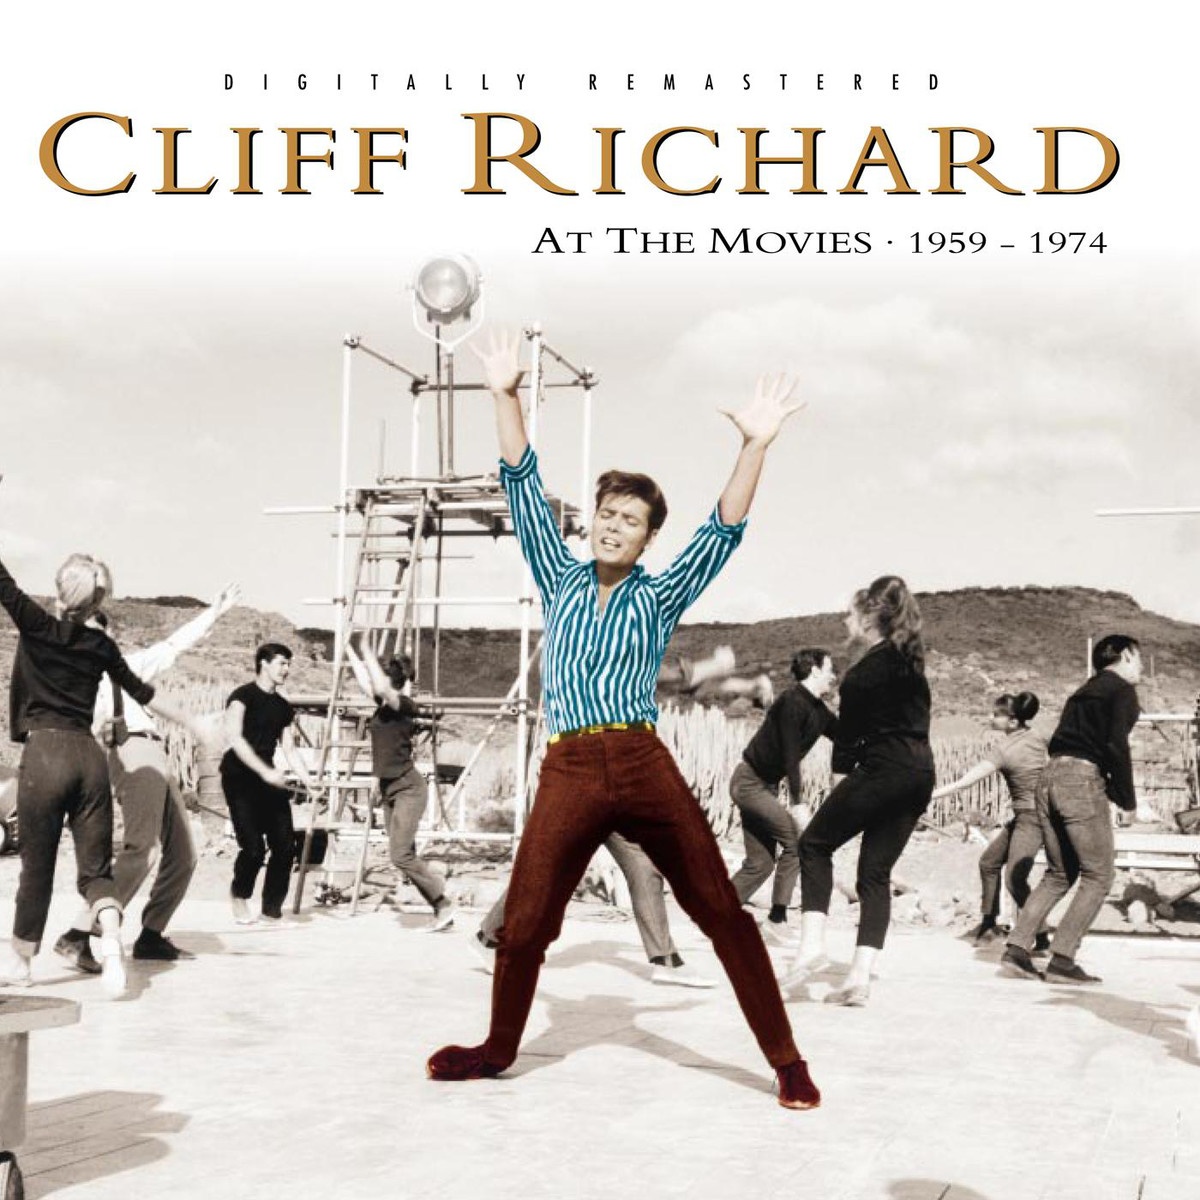 Cliff Richard At The Movies 1959-1974